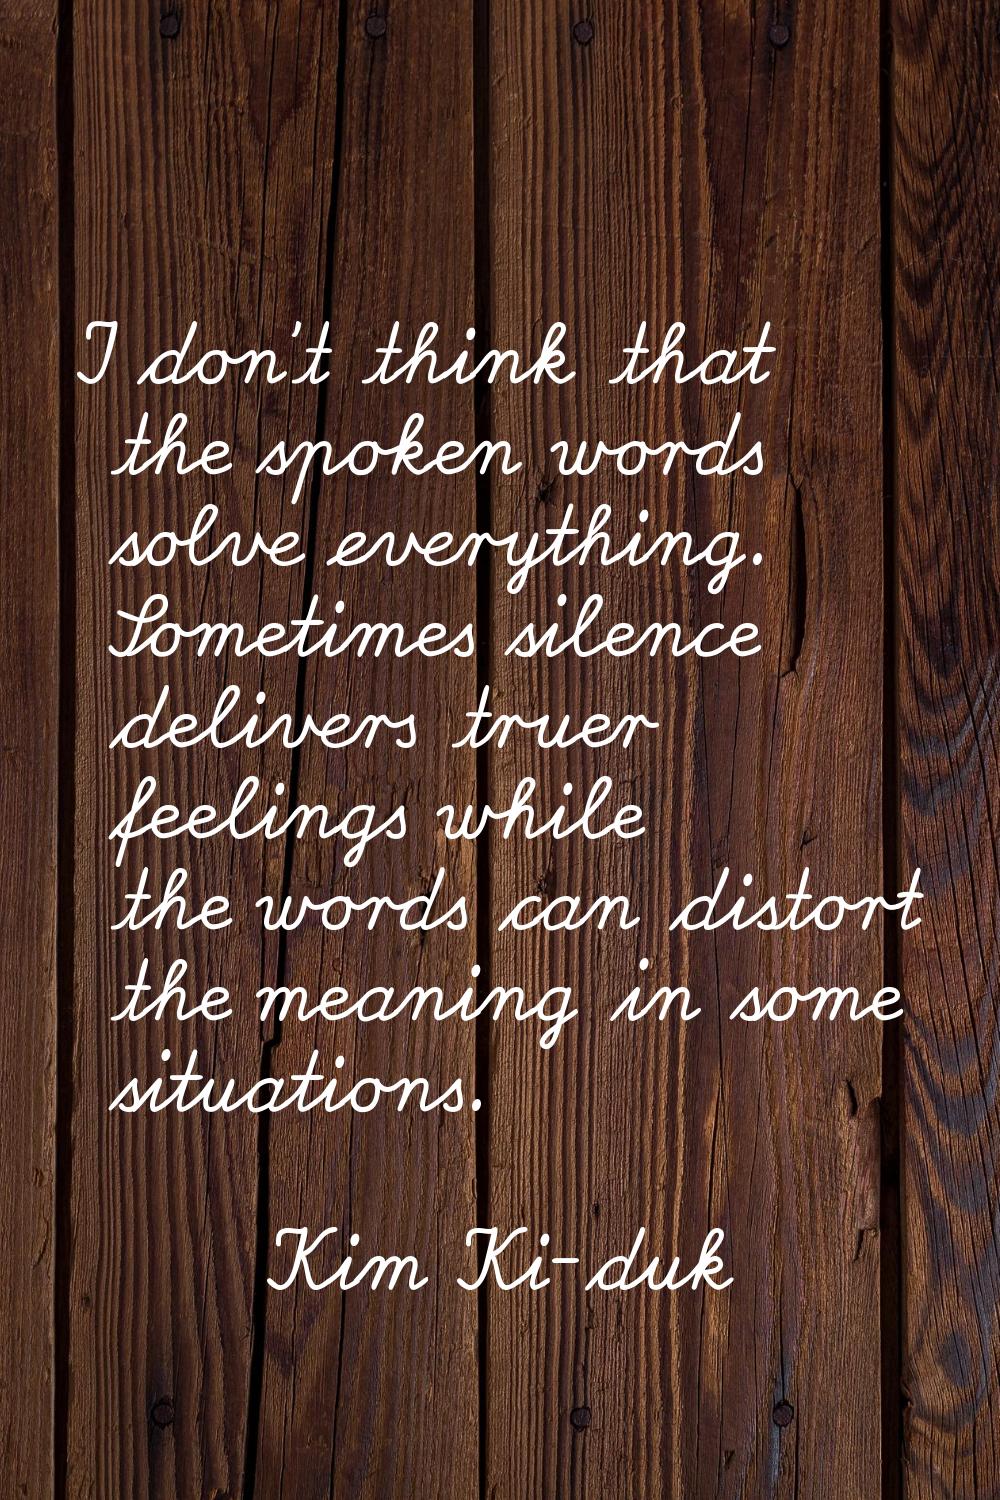 I don't think that the spoken words solve everything. Sometimes silence delivers truer feelings whi